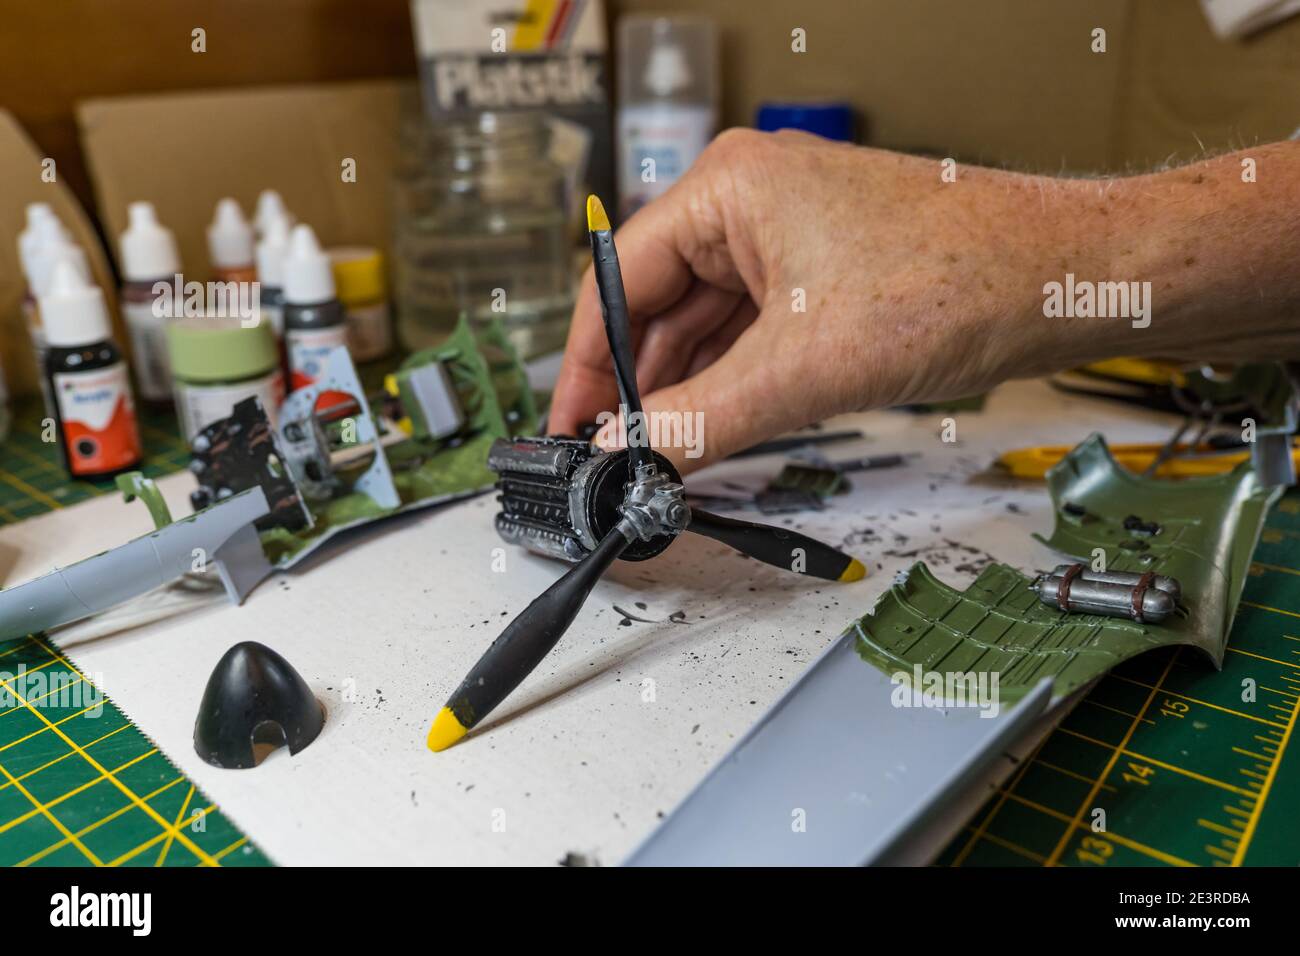 Man constructing engine of Airfix Spitfire model aeroplane 1/24th in scale on home desk Stock Photo